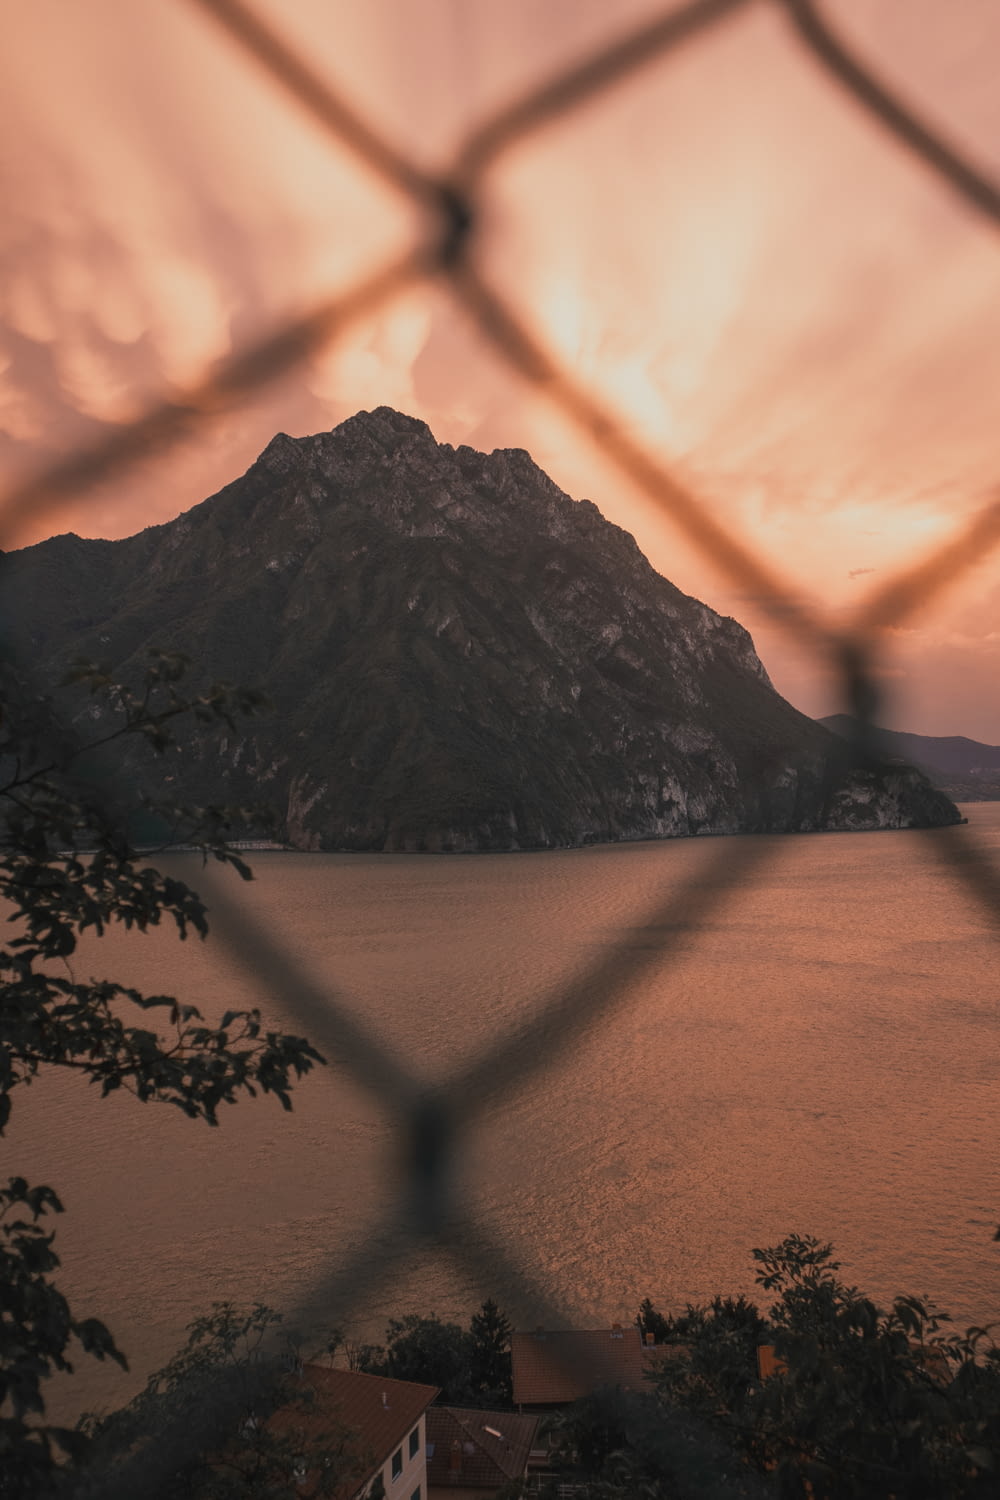 a view of a lake through a chain link fence